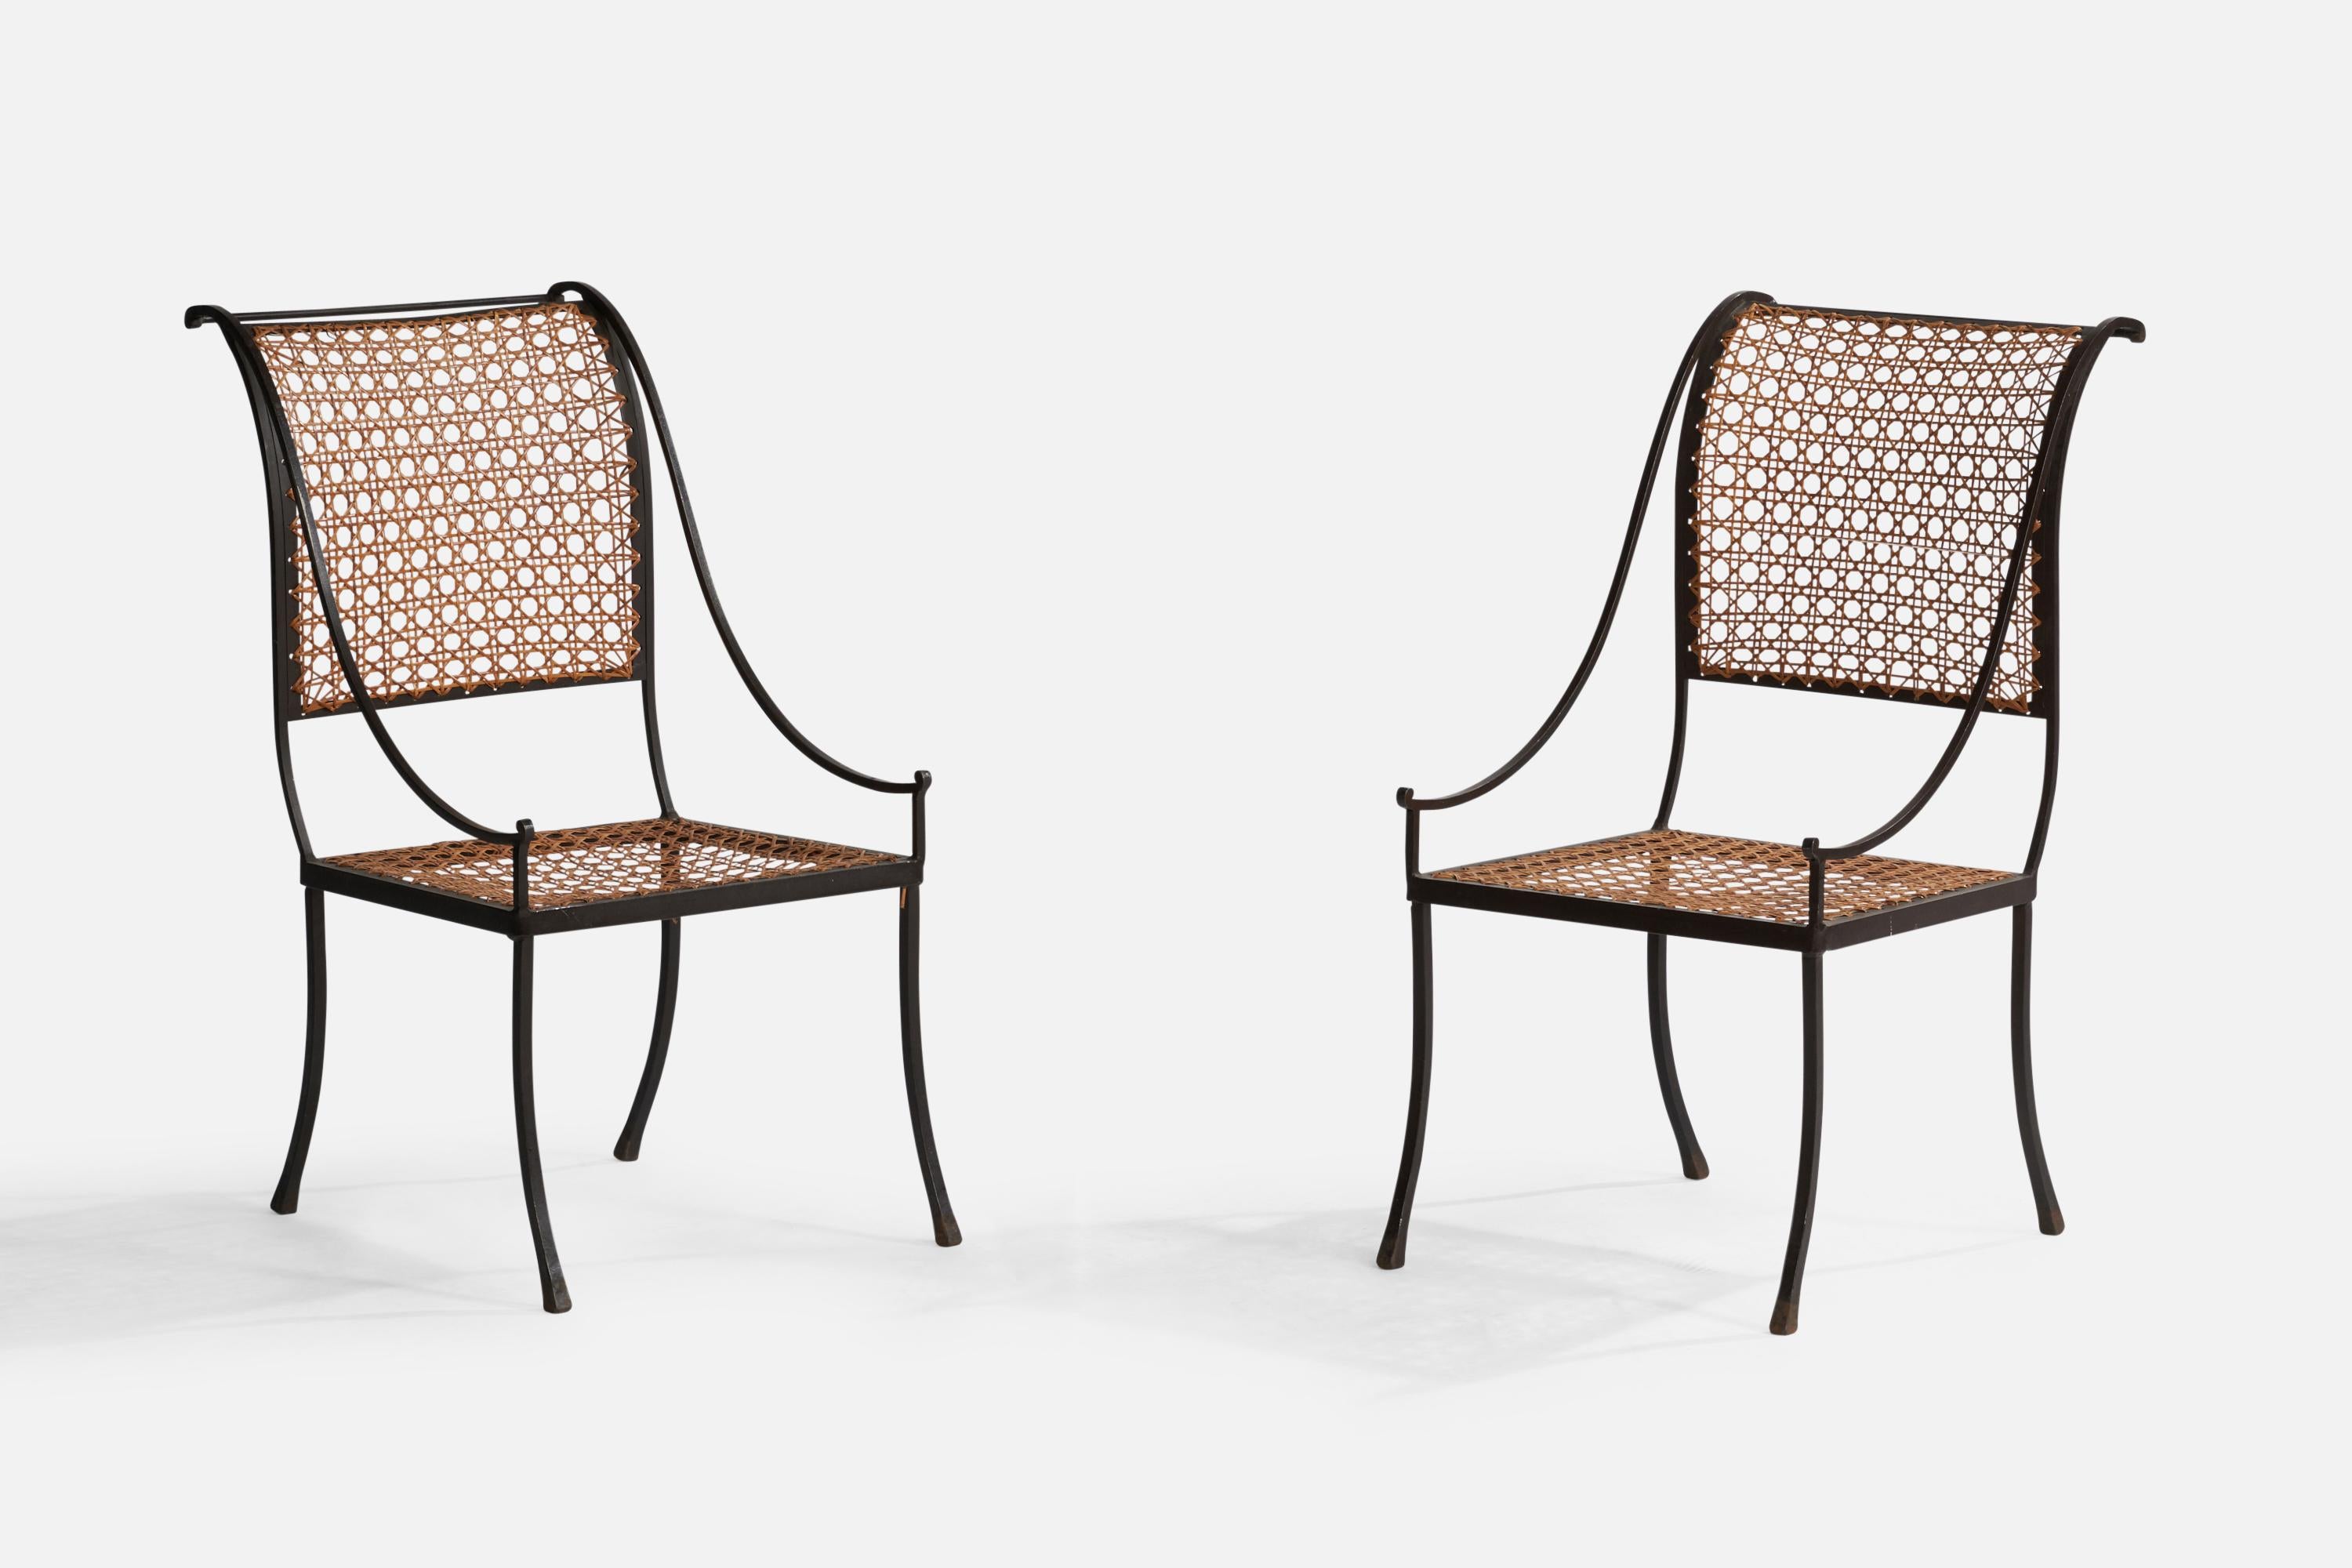 A pair of wrought iron and cane side chairs designed by John Vesey and produced by John Vesey, Inc. circa 1958.